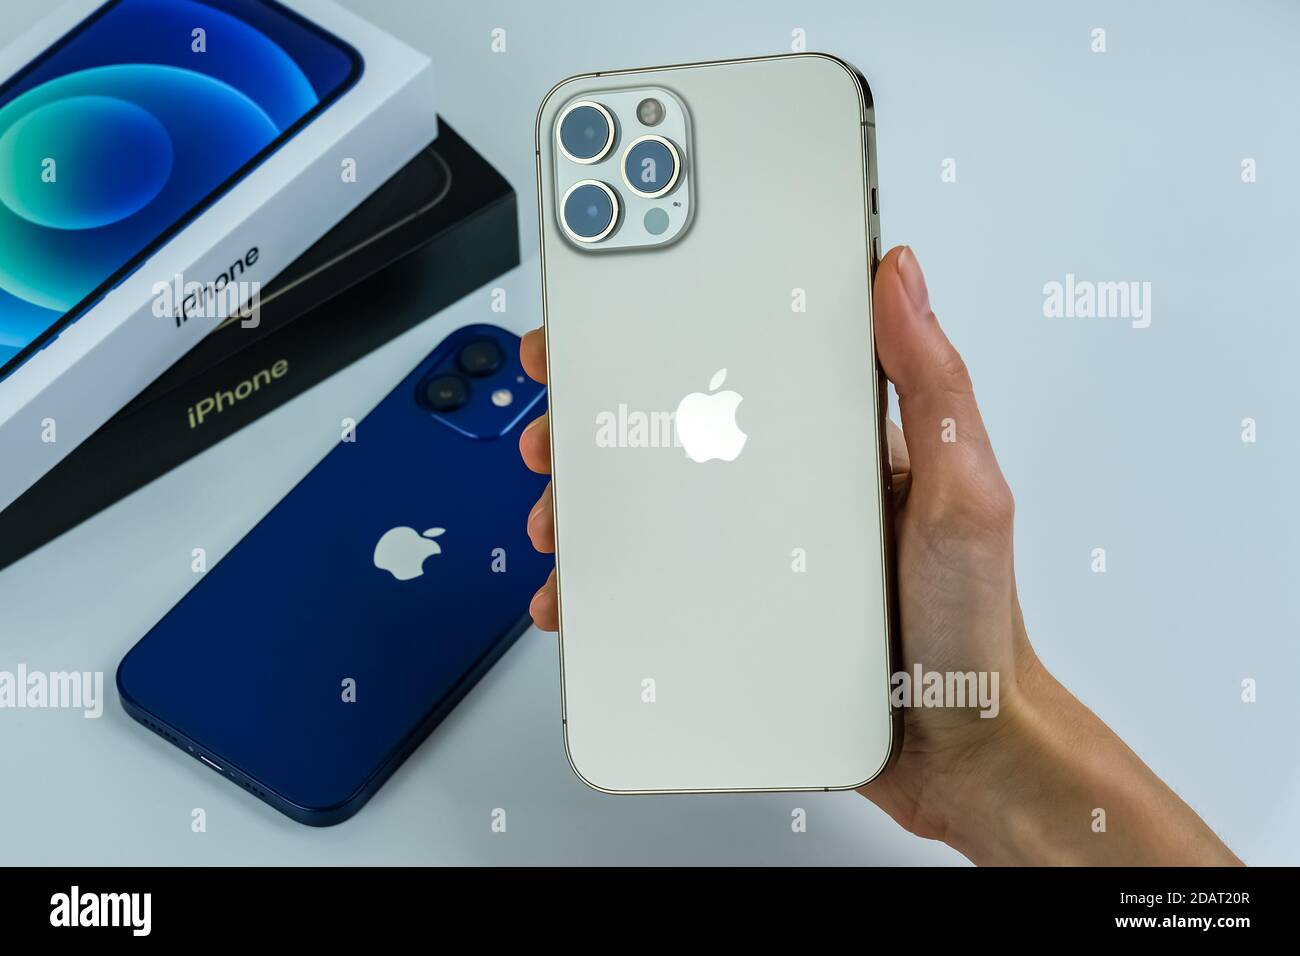 Iphone 12 Pro Max In Gold Next To Iphone 12 In Blue Stock Photo Alamy